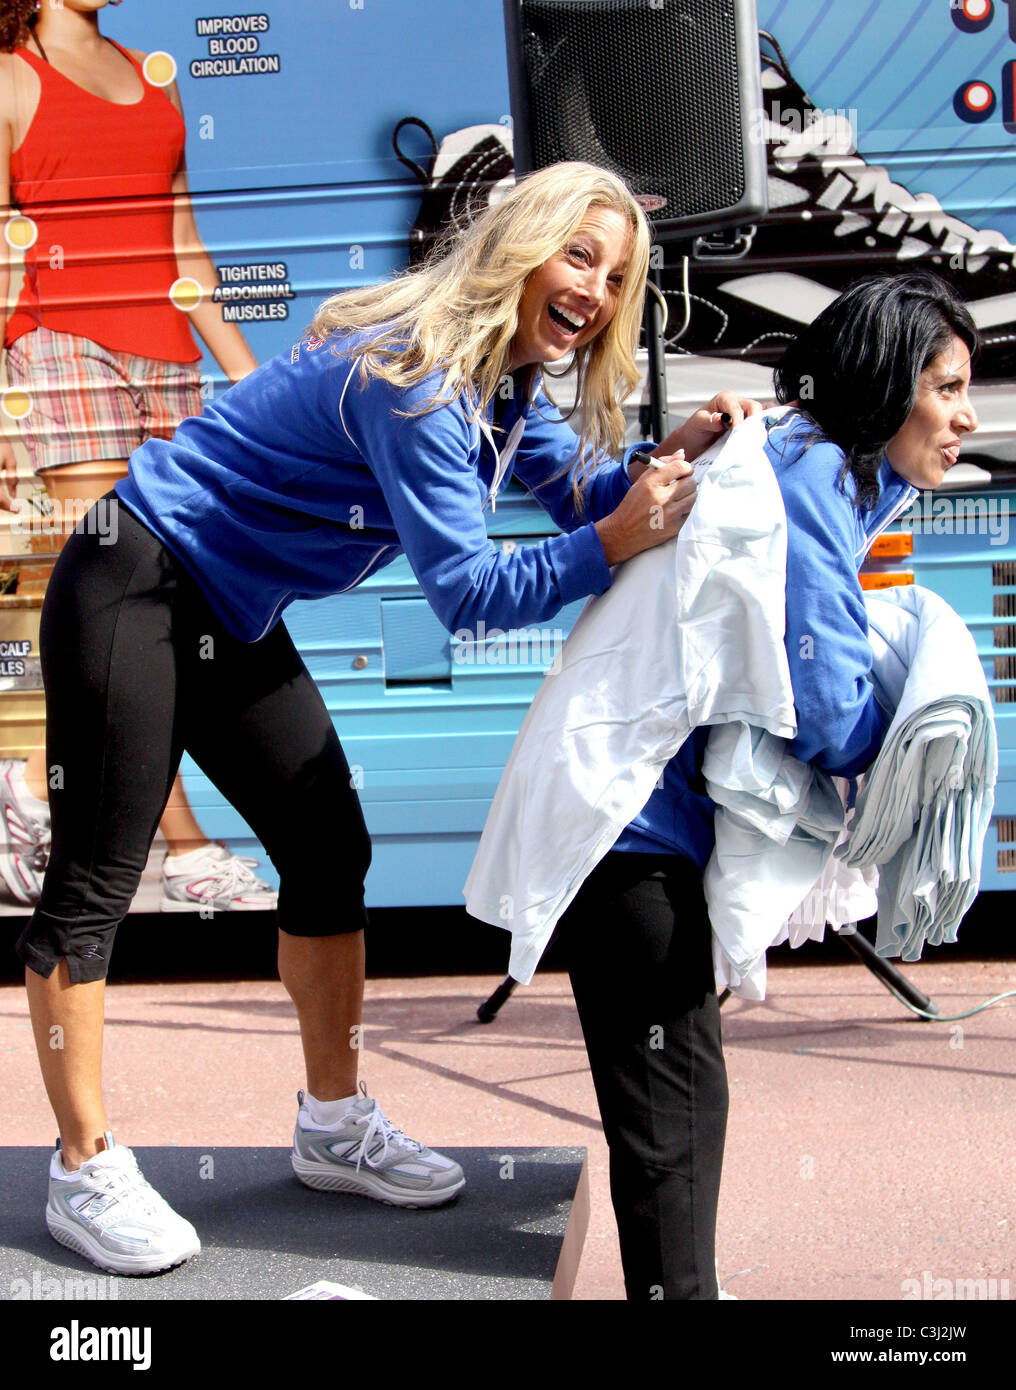 Denise Austin promotes Skechers Shape Ups fitness footwear in Times Square  New York City, USA - 22.10.09 Mr Blue Stock Photo - Alamy